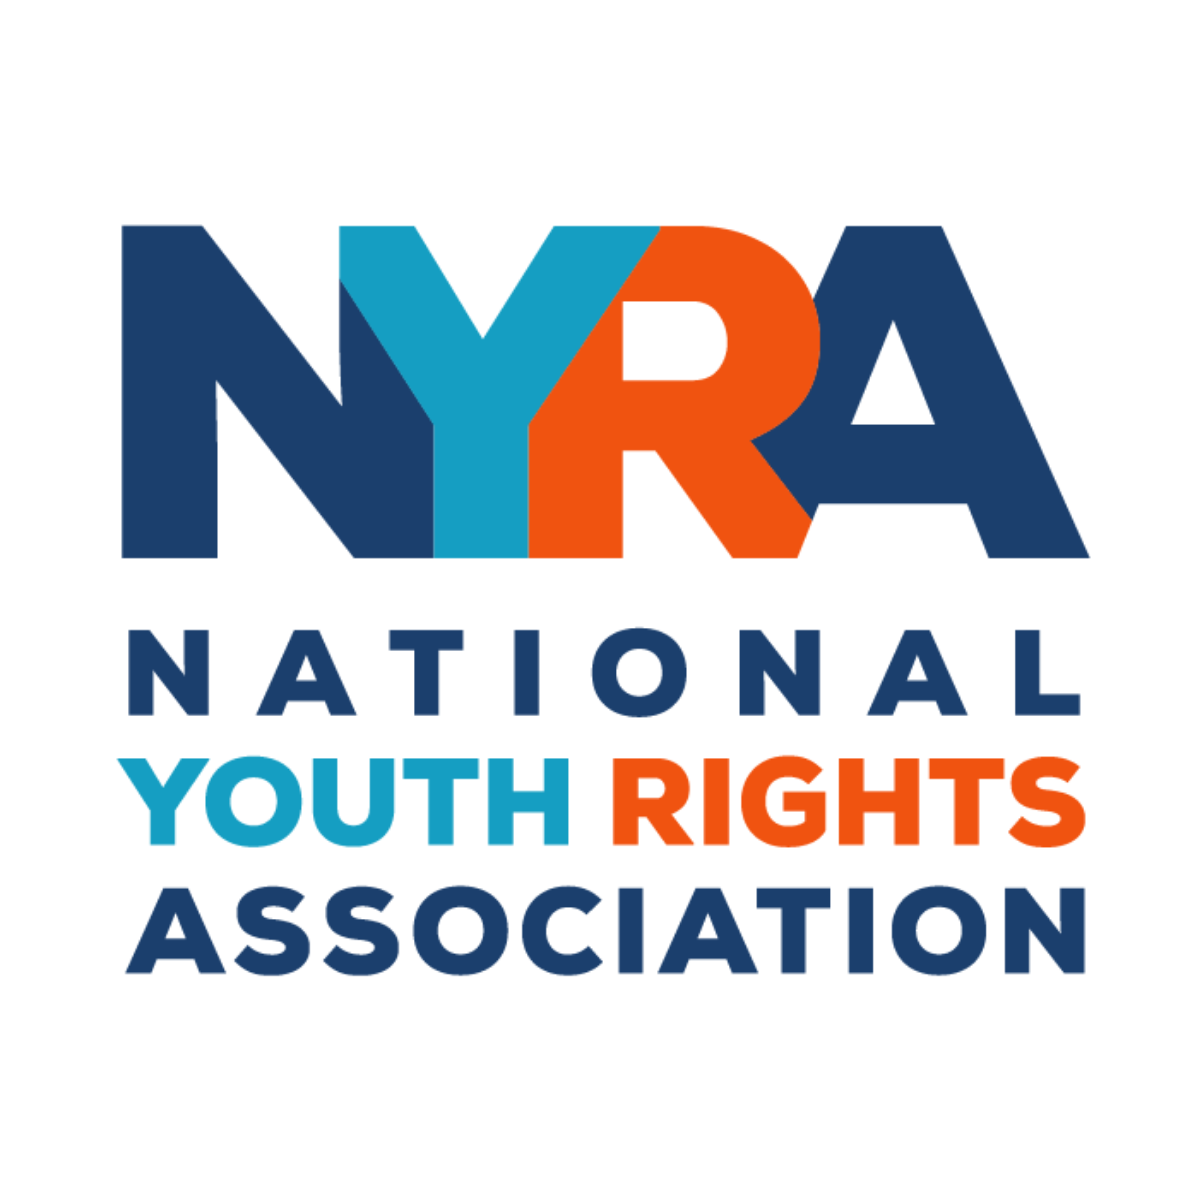 Youth rights. Логотип ныра. Topfree equal rights Association. NFA logo. Rights org